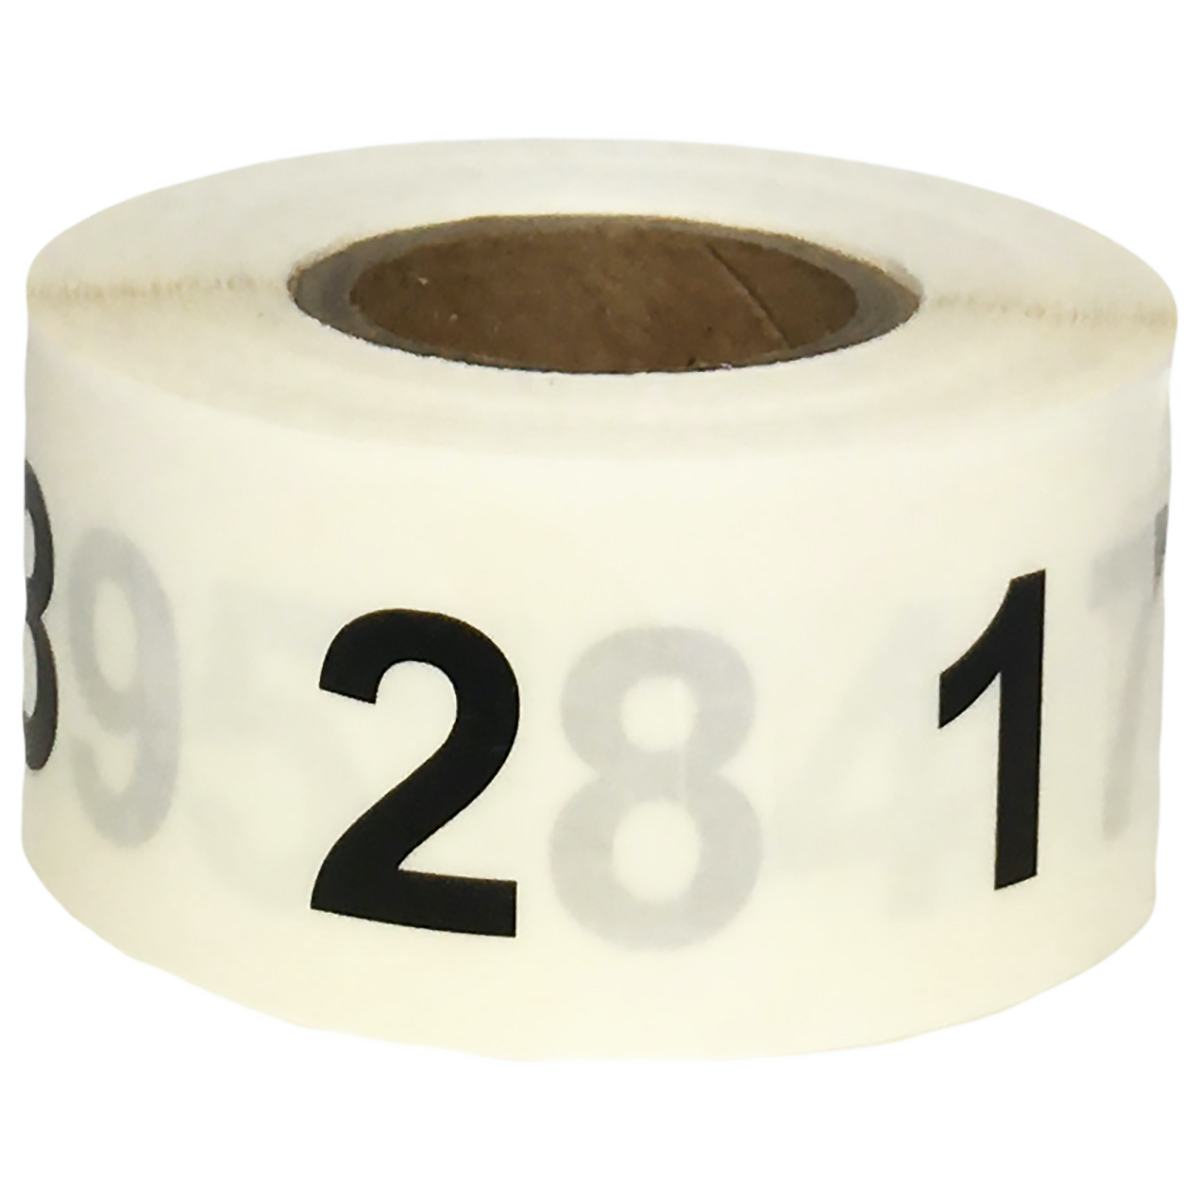 NUMBERS 160 STICKERS Sequential, 1-1/2 Circle Labels Consecutive, Matte  Finish,number Sticker,self Adhesive Label,peel and Stick 